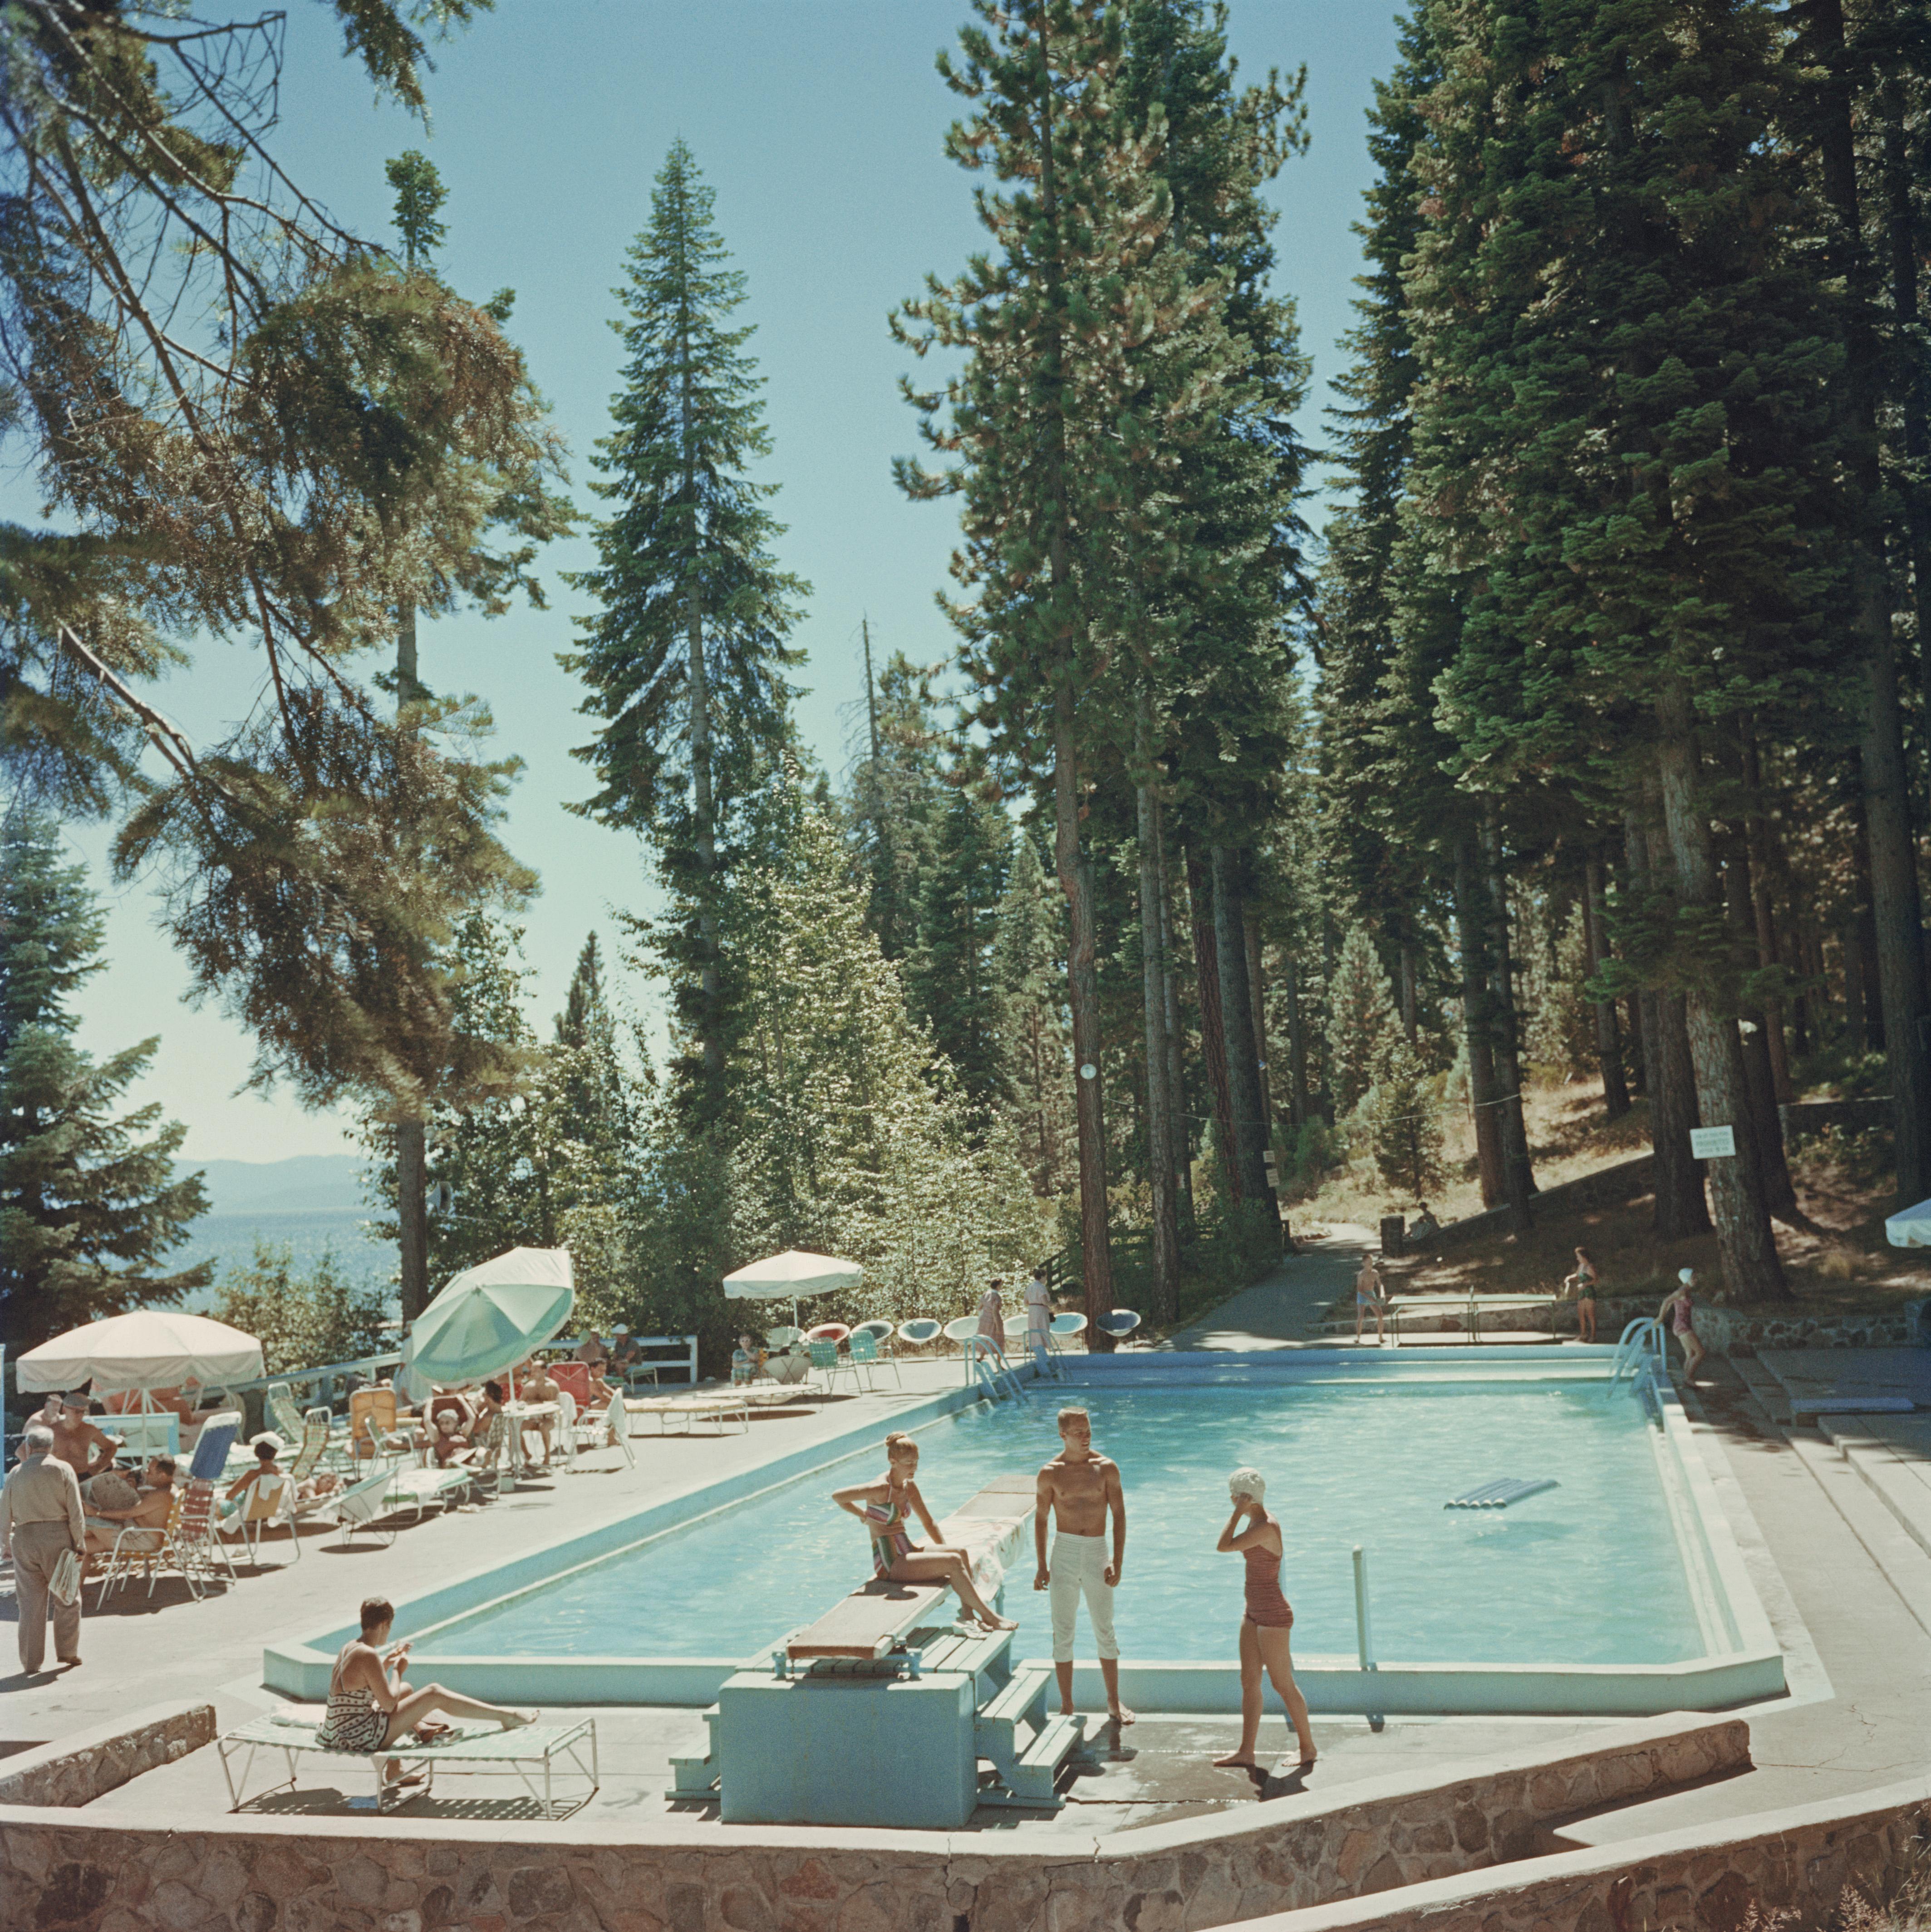 Slim Aarons
Pool At Lake Tahoe, 1959
Archival pigment print
Estate stamped and numbered edition of 150 
with Certificate of authenticity

Bathers by a pool at the Tahoe Tavern on the shore of Lake Tahoe, California, 1959.

Slim Aarons (1916-2006)